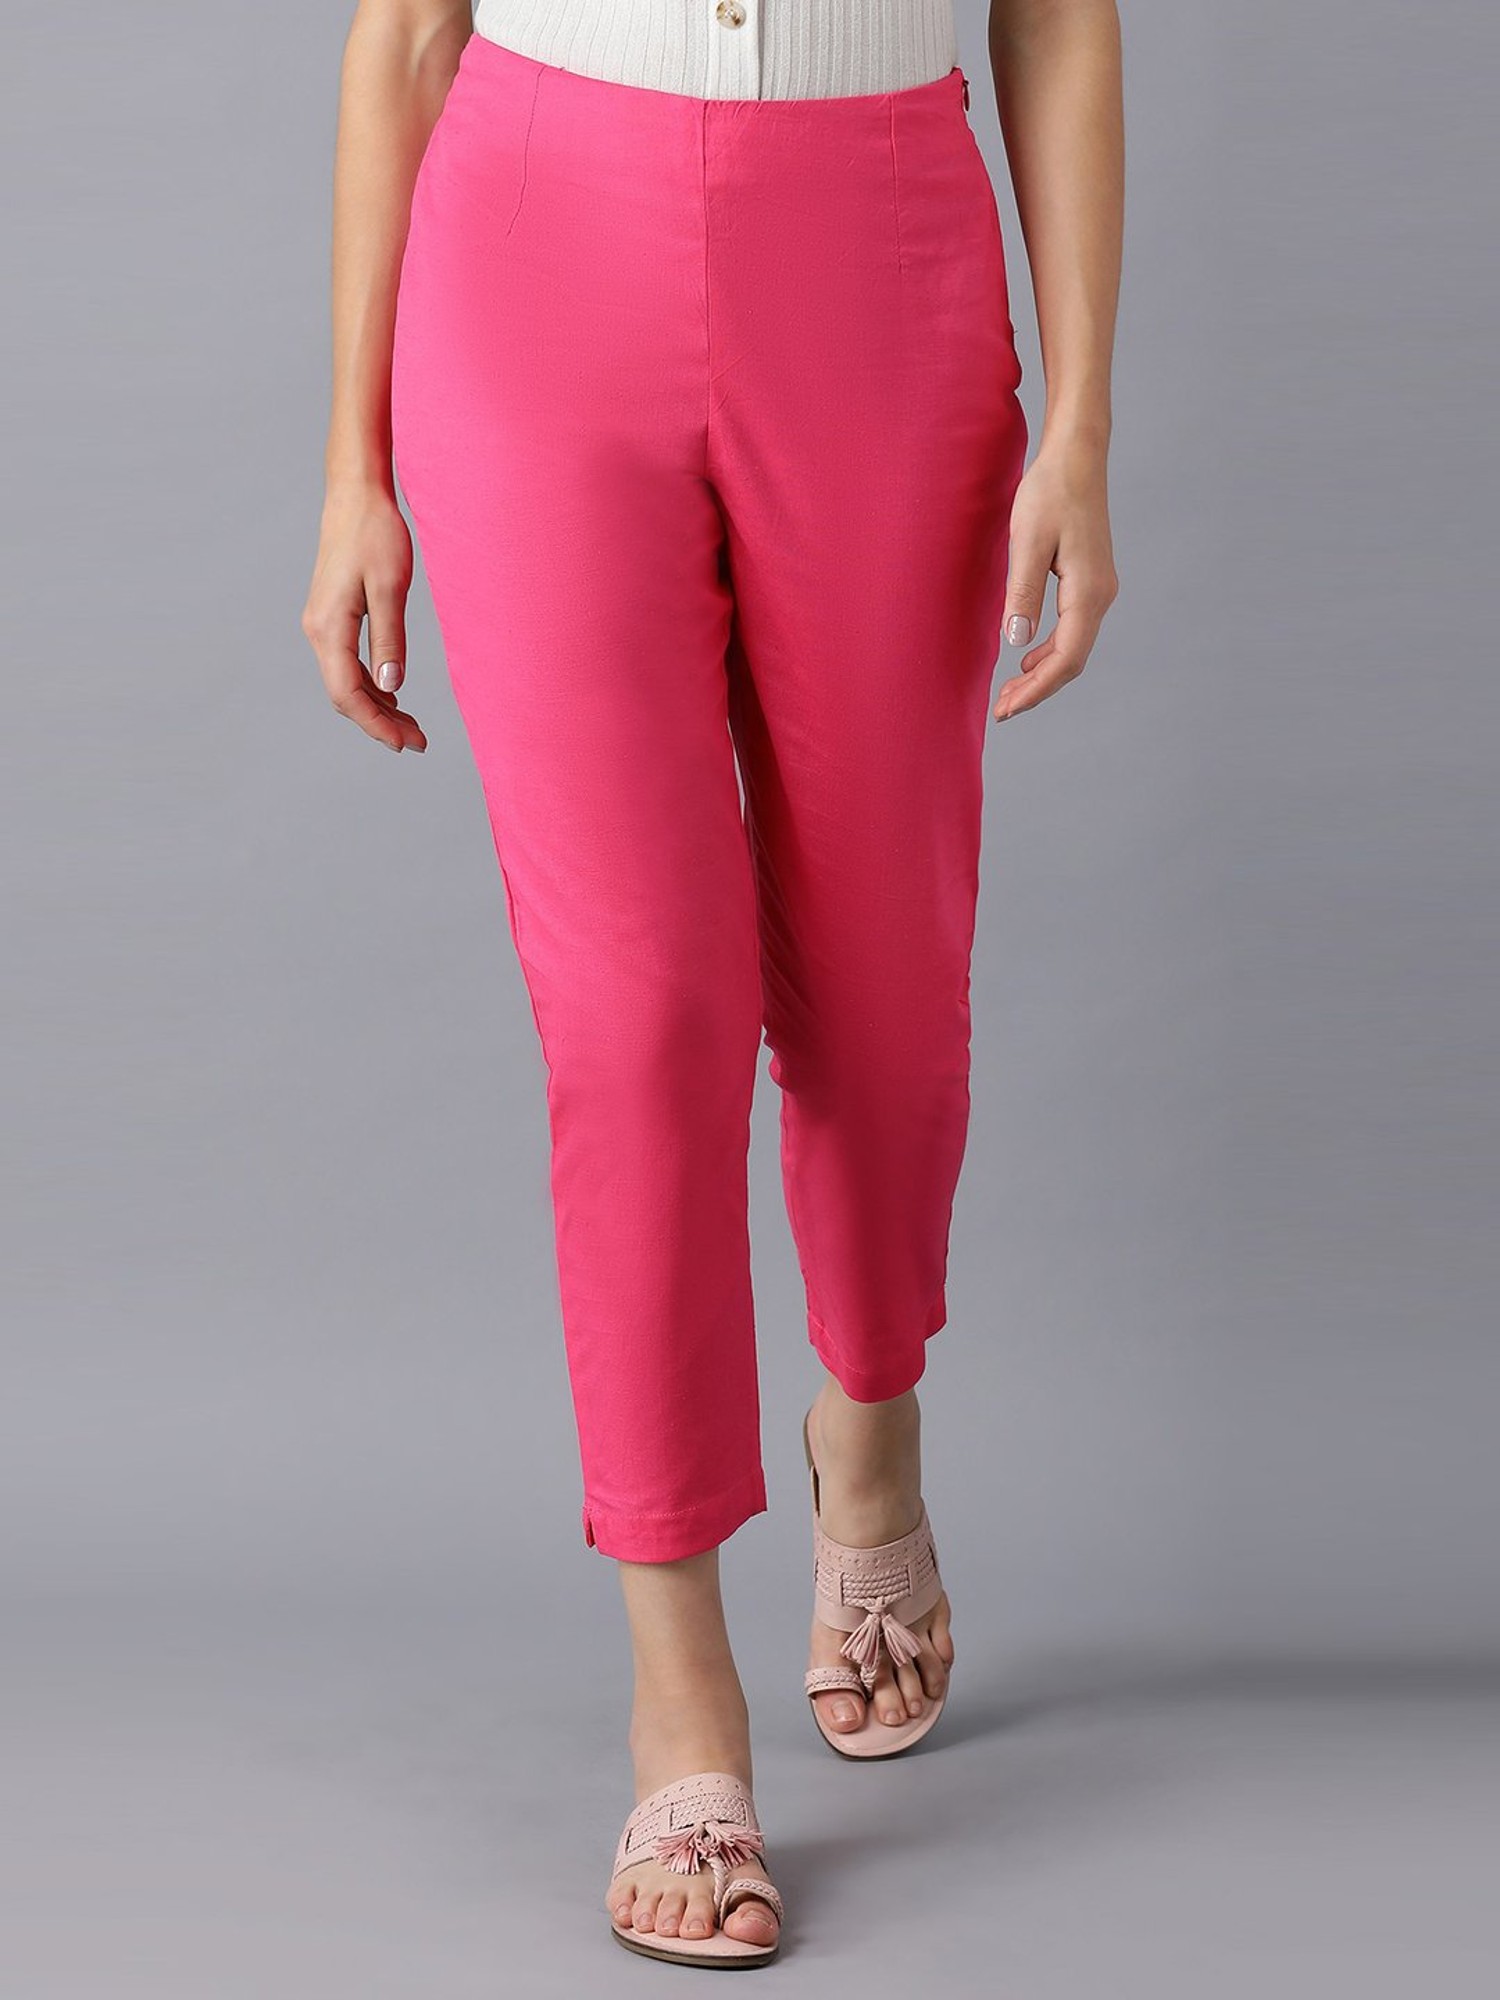 Buy GO COLORS Shocking Pink Womens Solid Shiny Pants | Shoppers Stop